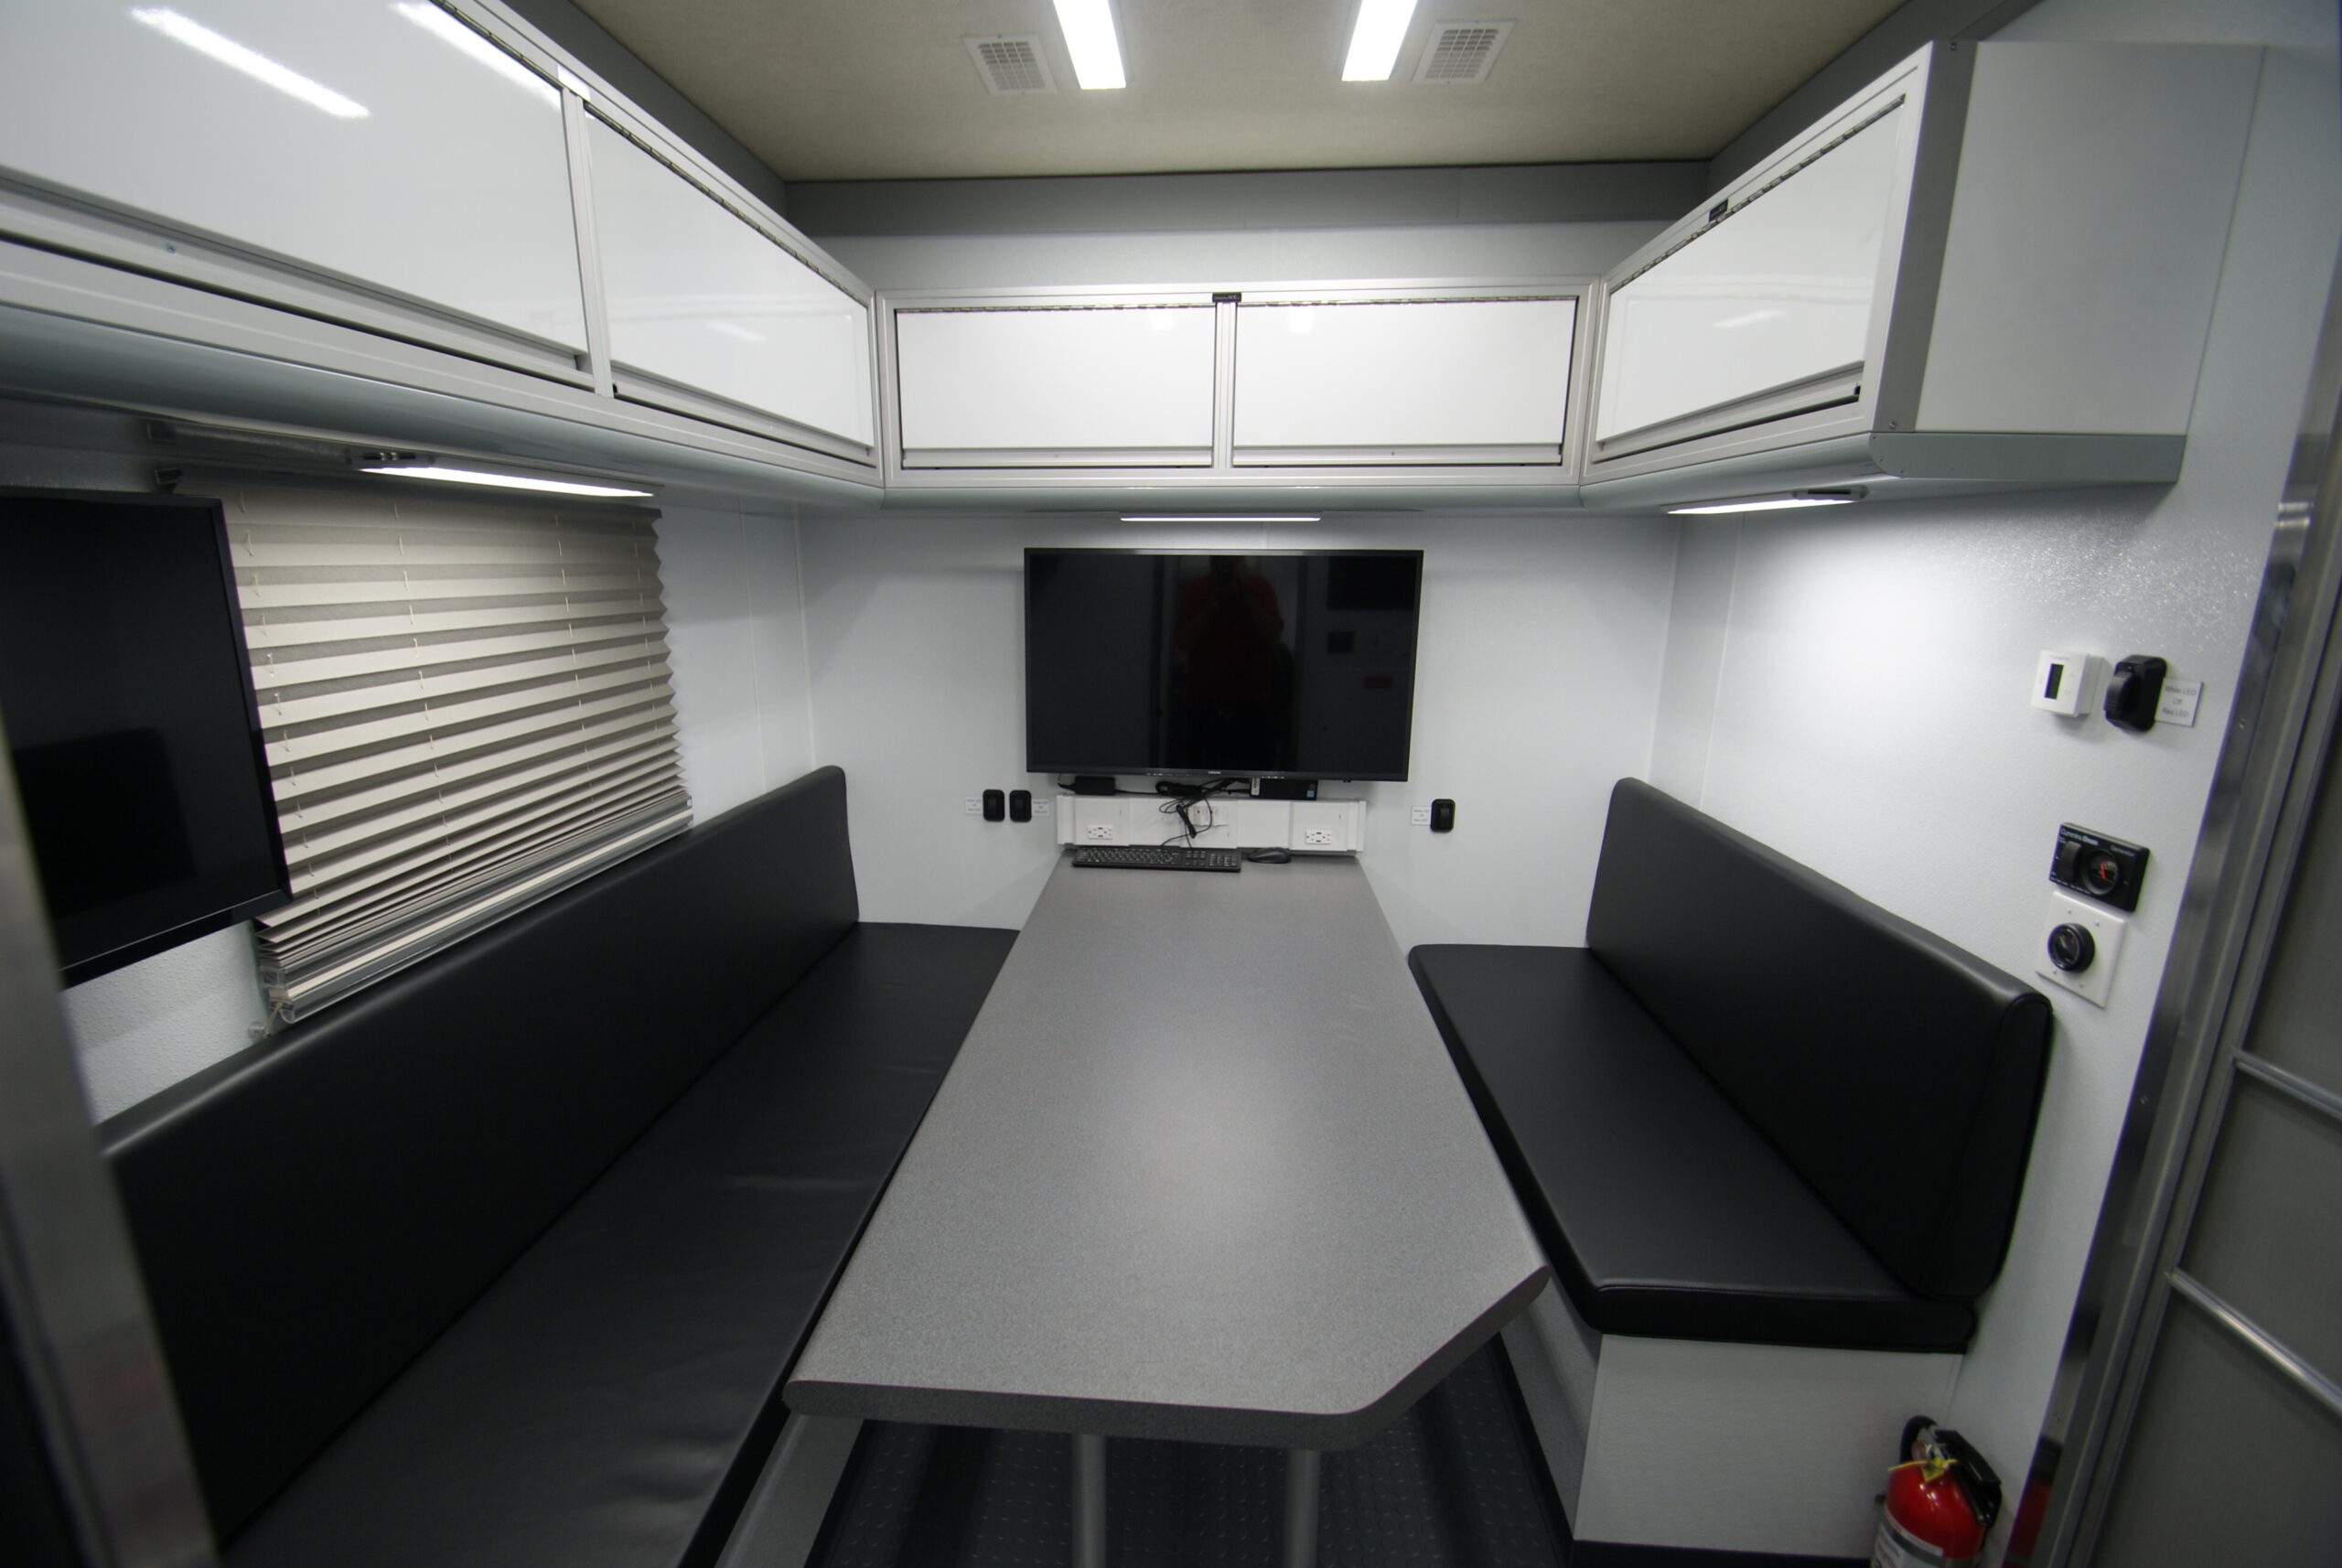 A view of the conference room inside the unit for Westmoreland County Public Safety.